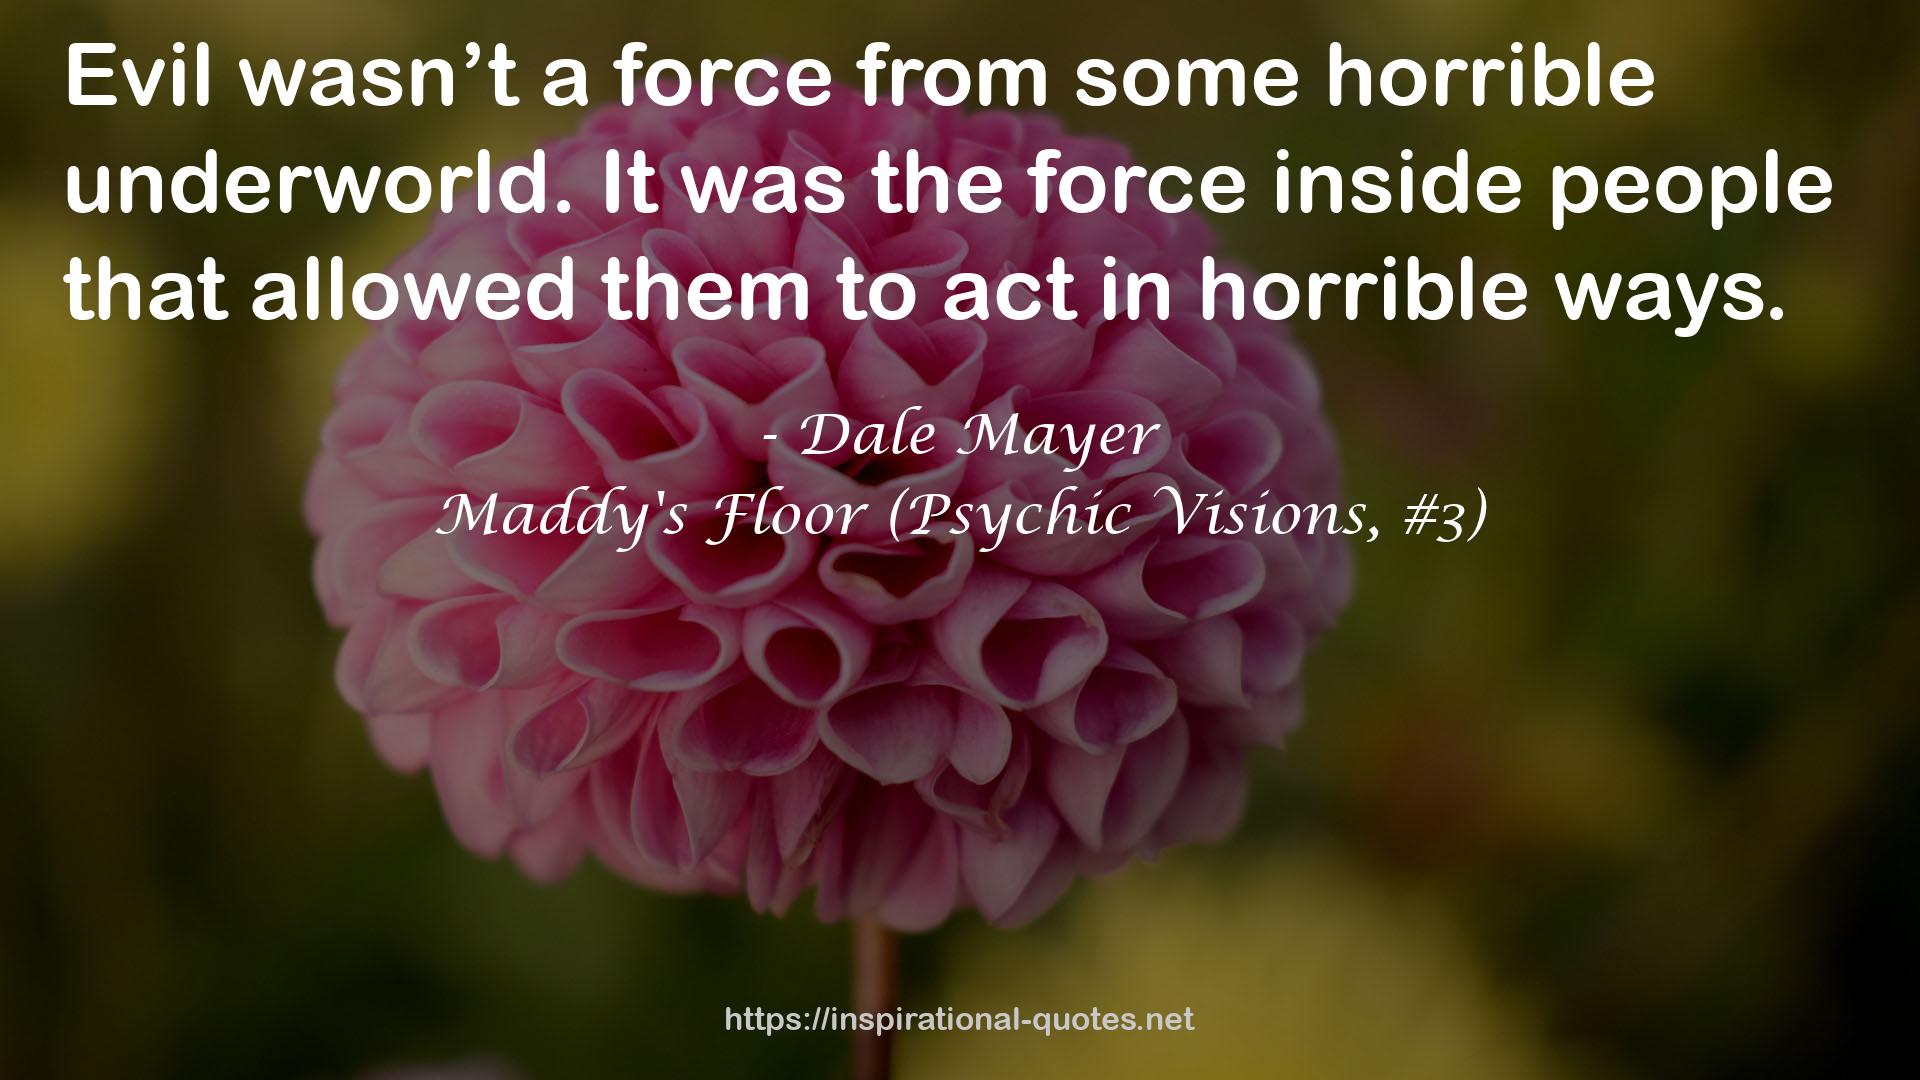 Maddy's Floor (Psychic Visions, #3) QUOTES